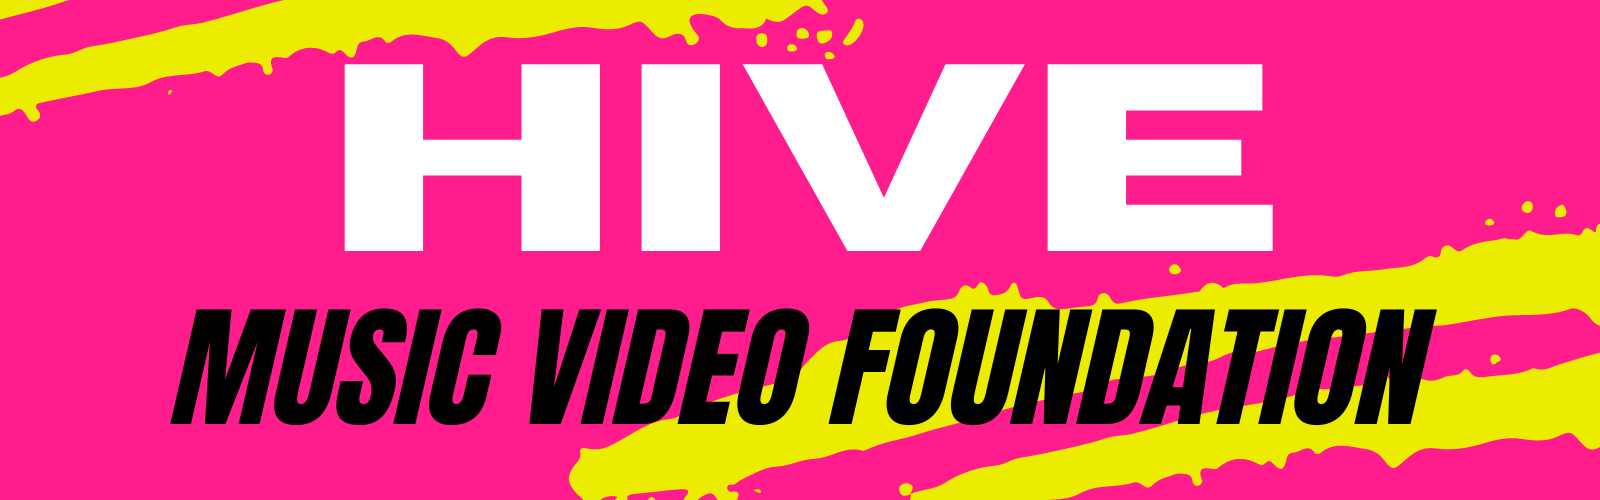 HIVE Music Video Foundation's cover